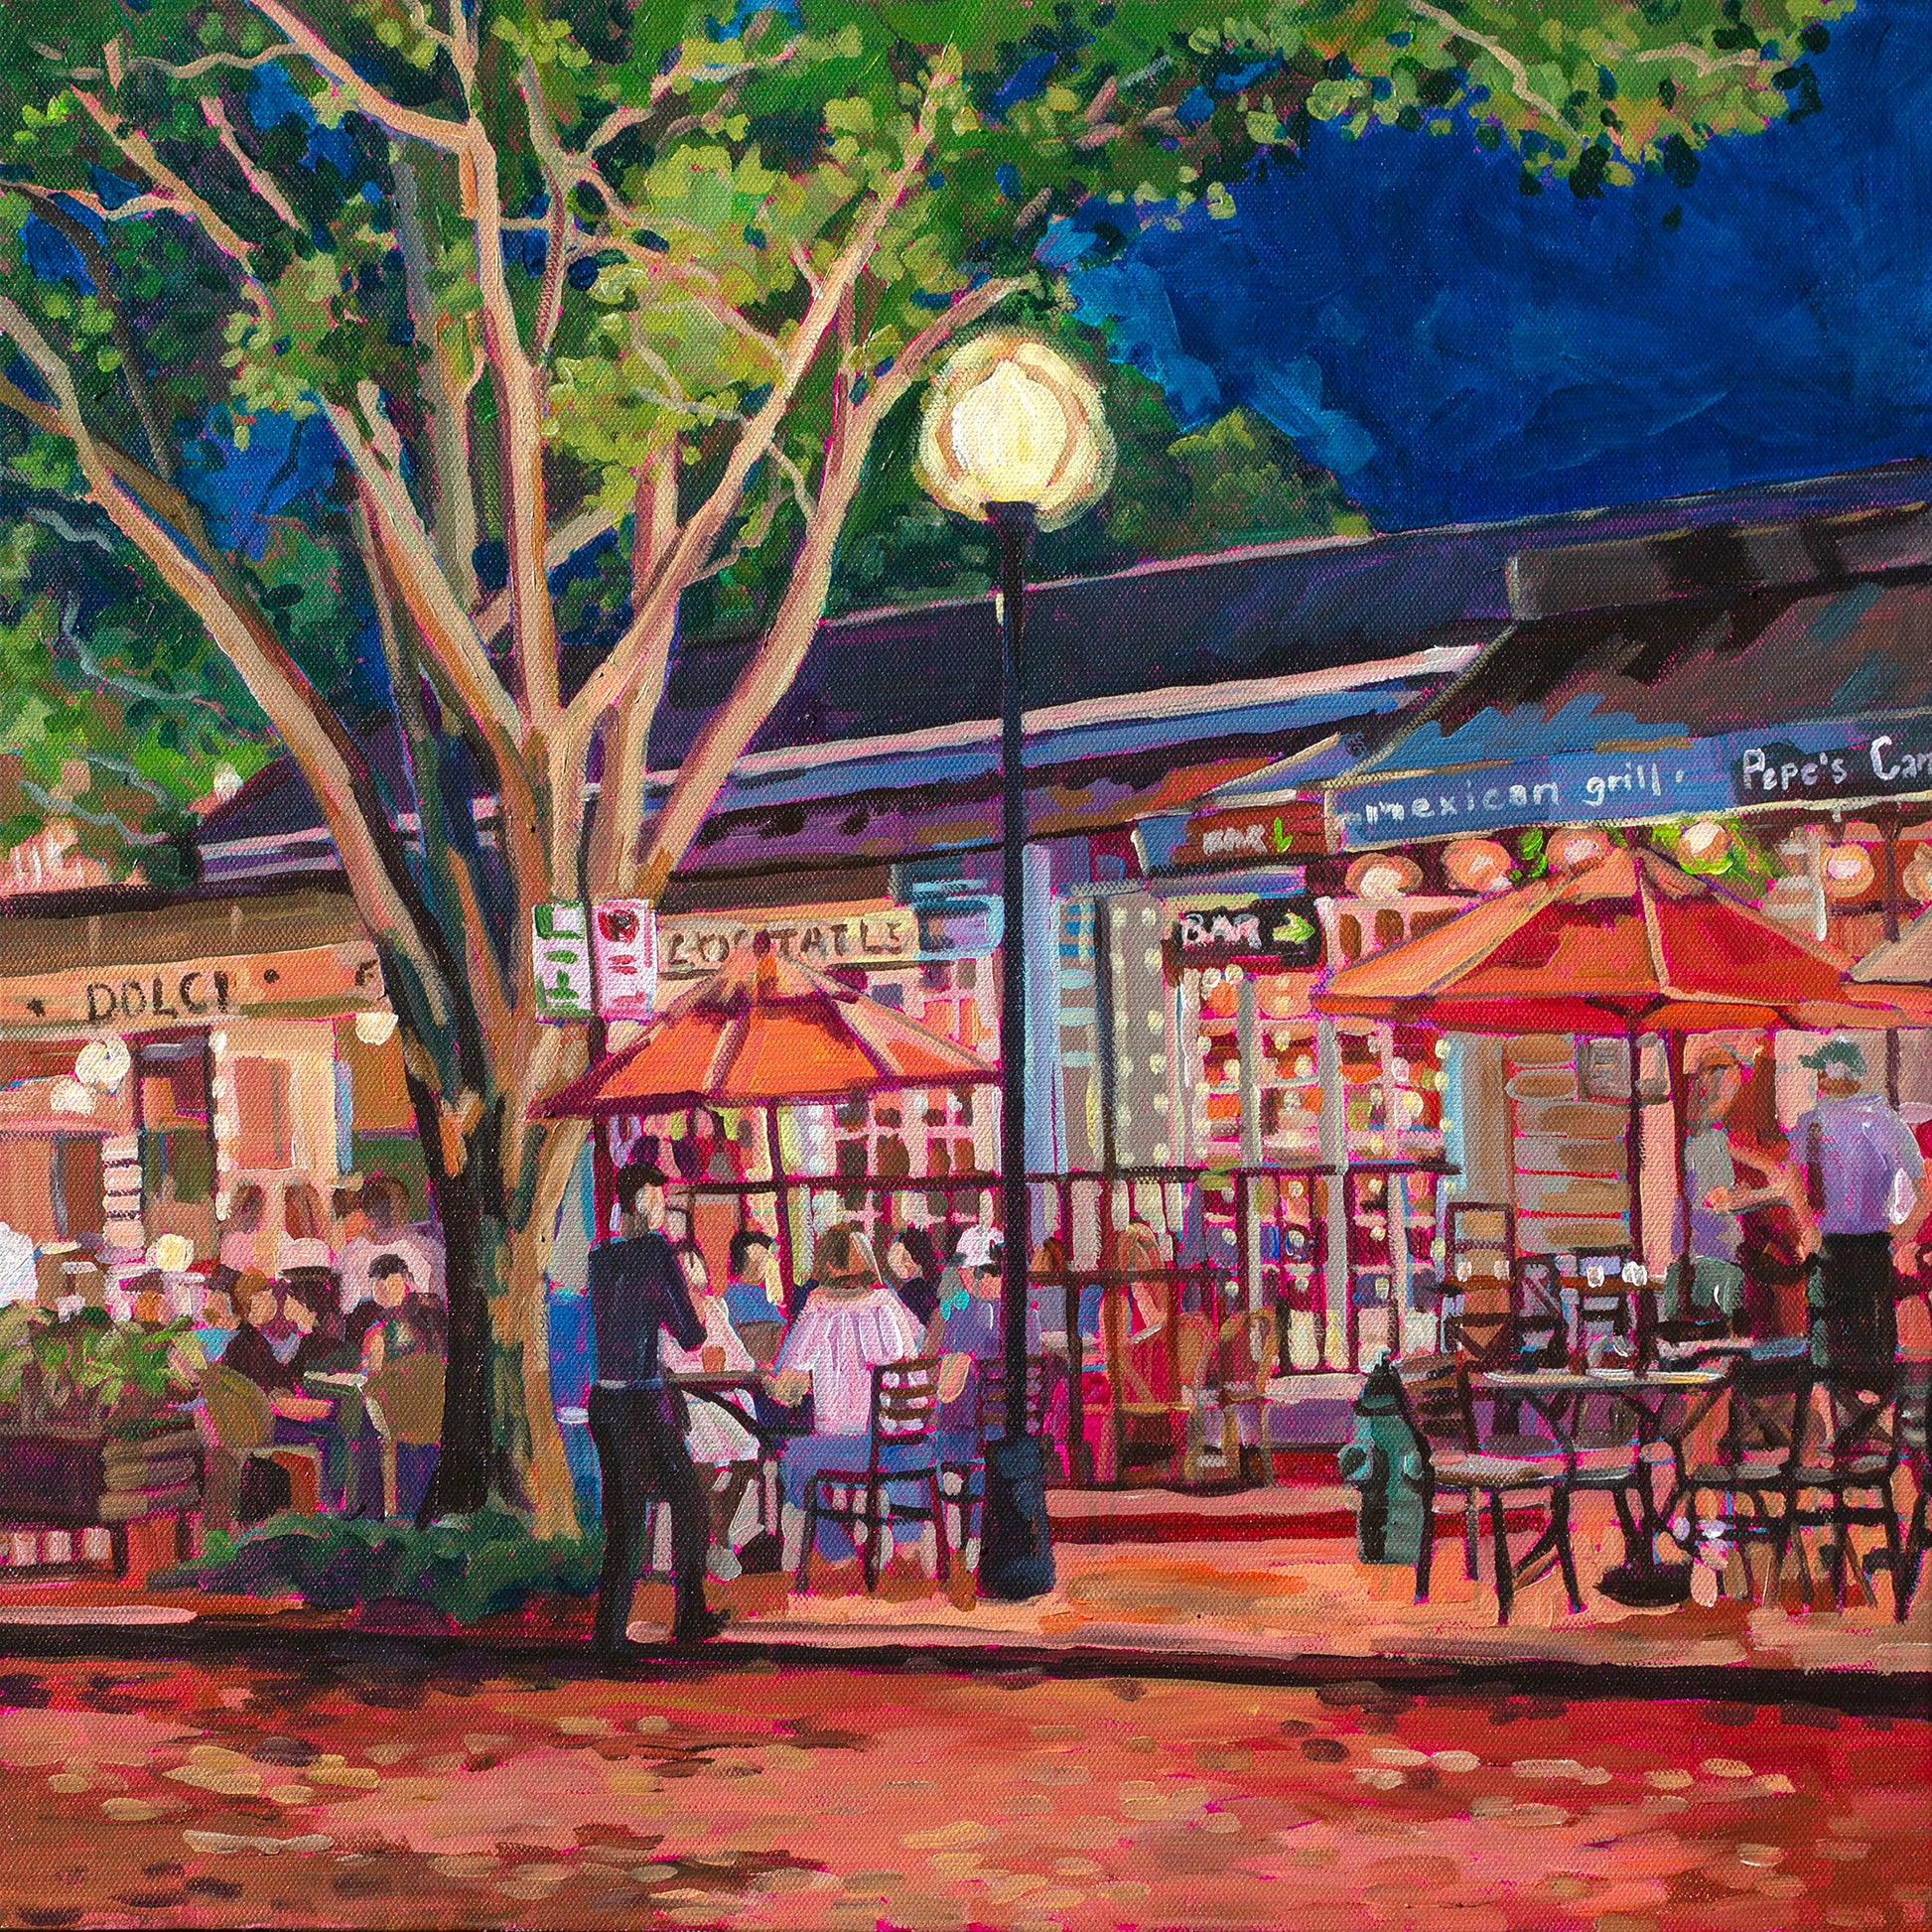 Vibrant nightscene painting of outdoor cafe with tables and trees dramatic lighting, Winter Park Nightlife scene 3, umbrellas and tables and tree 